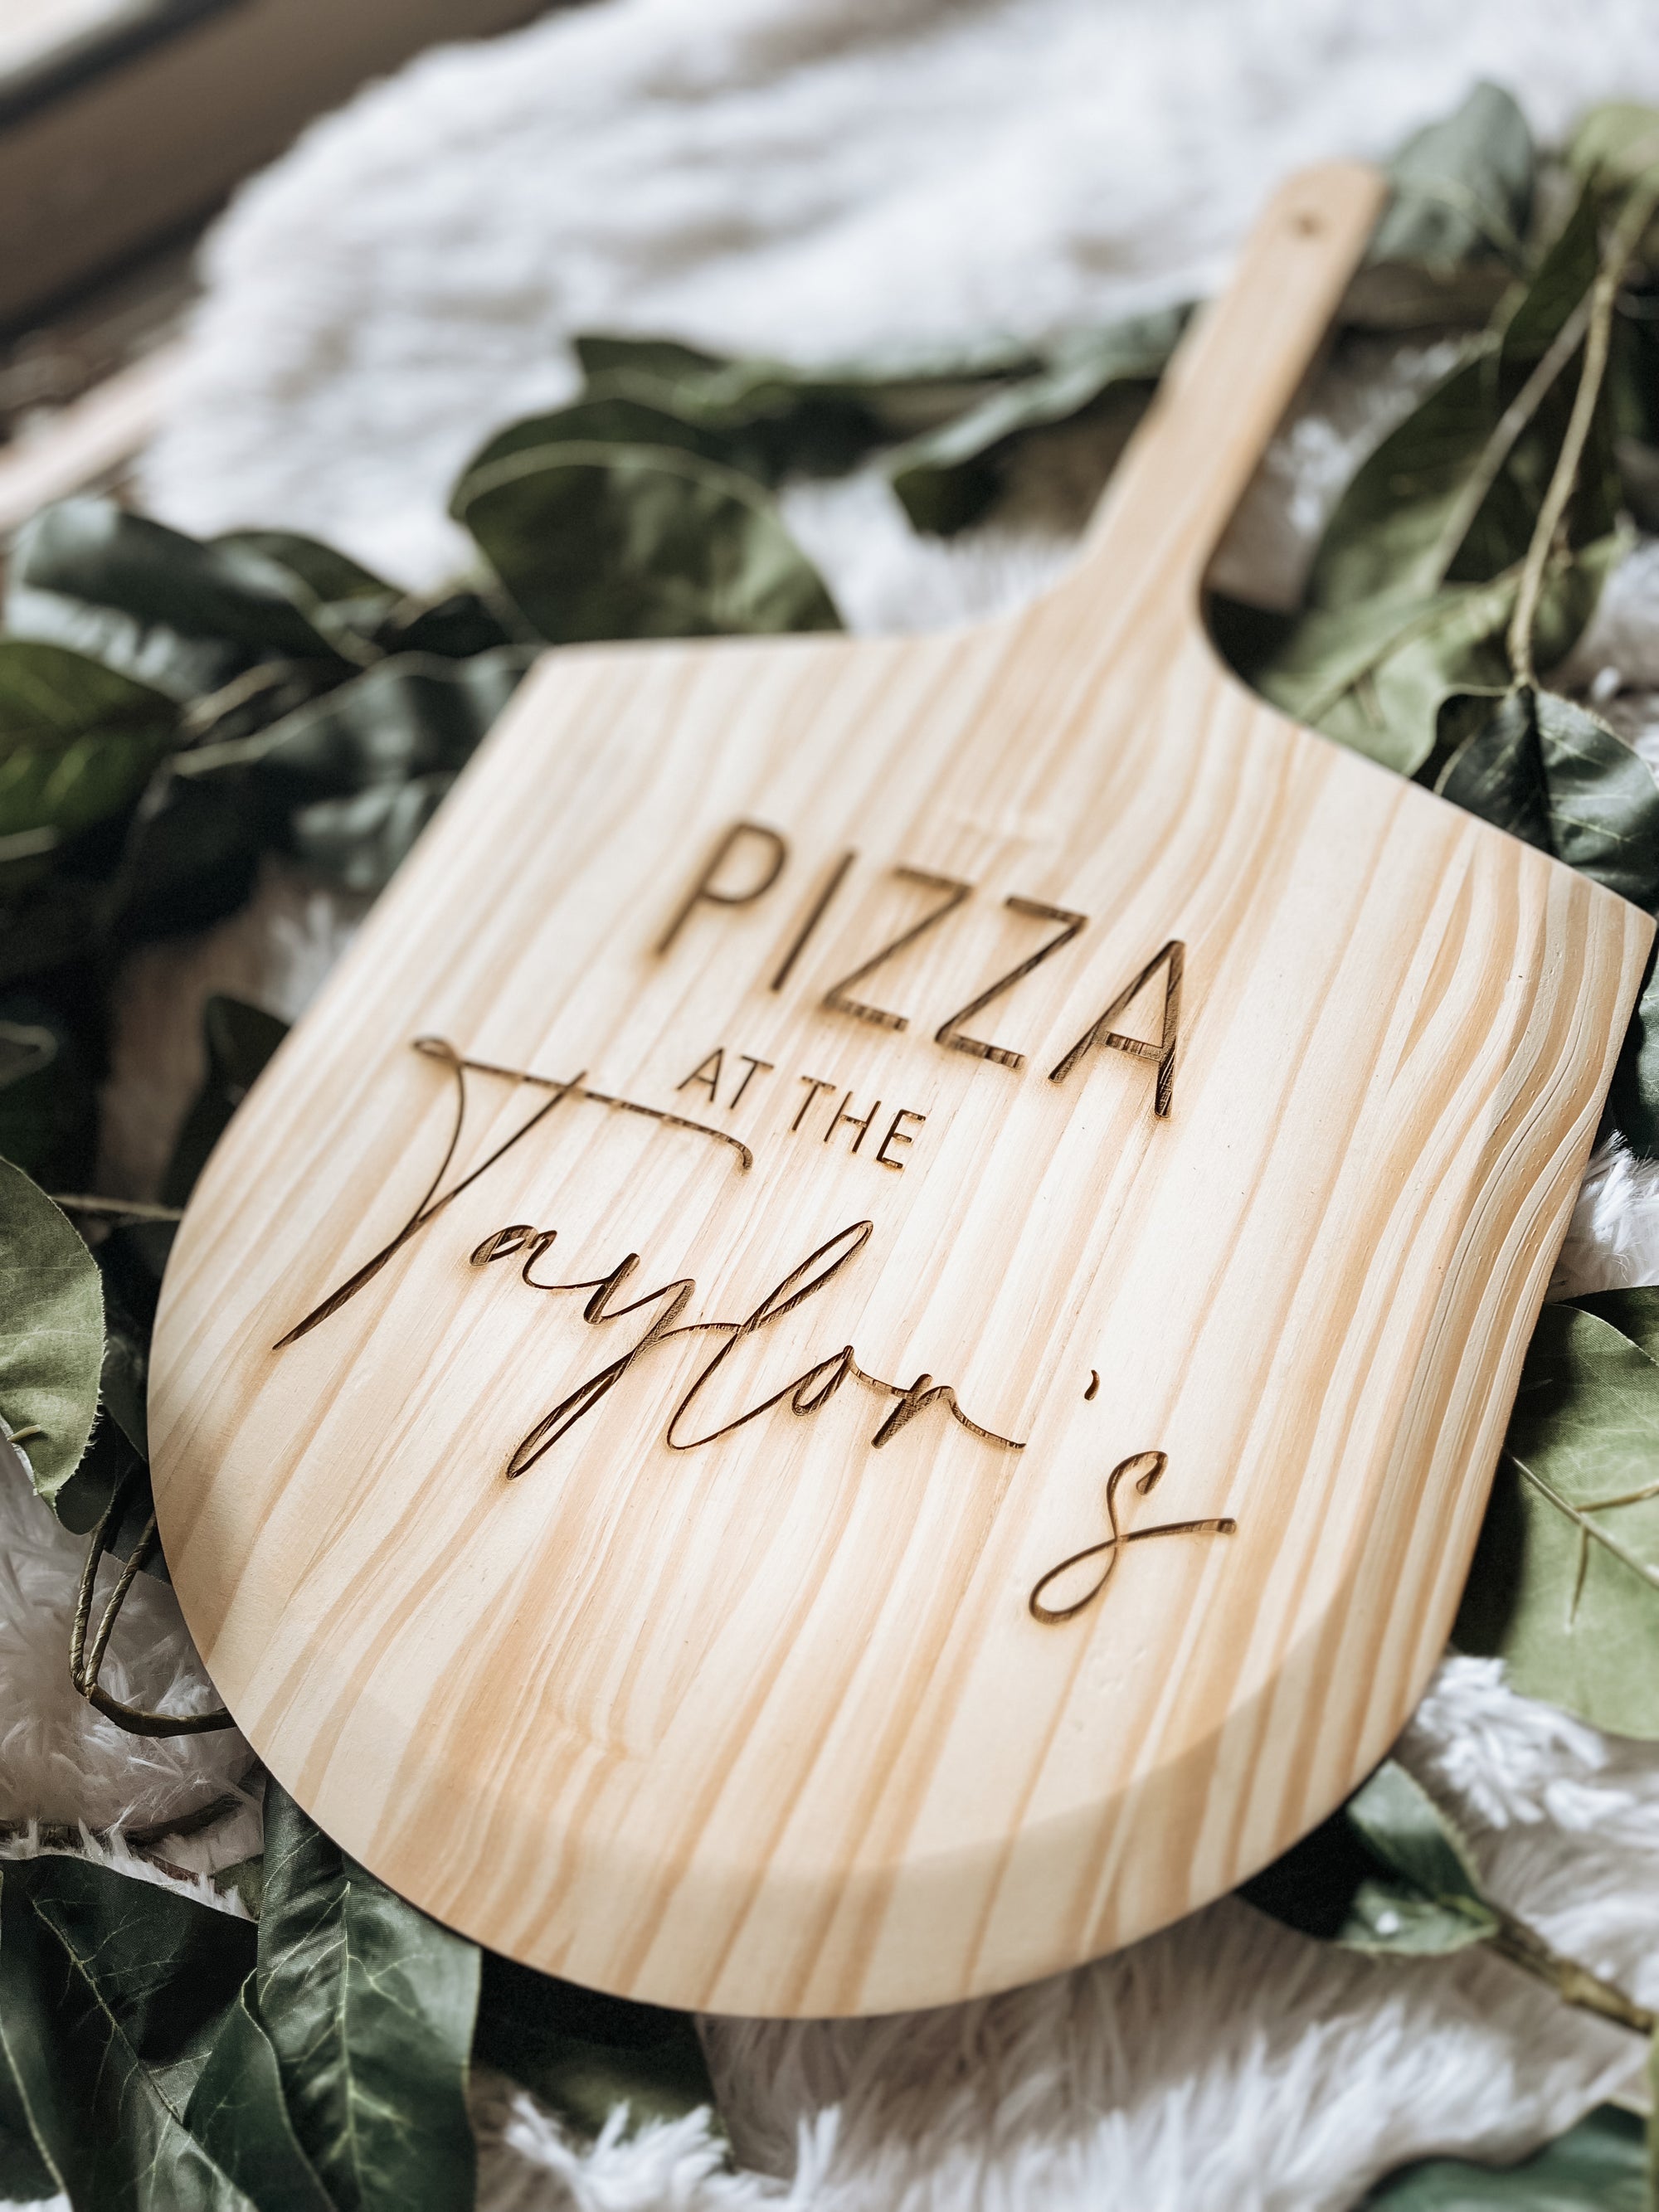 The Perfect Personalized Pizza Peel | Must Have Gift The Perfect Personalized Pizza Peel | Must Have Gift Fancy Front Porch